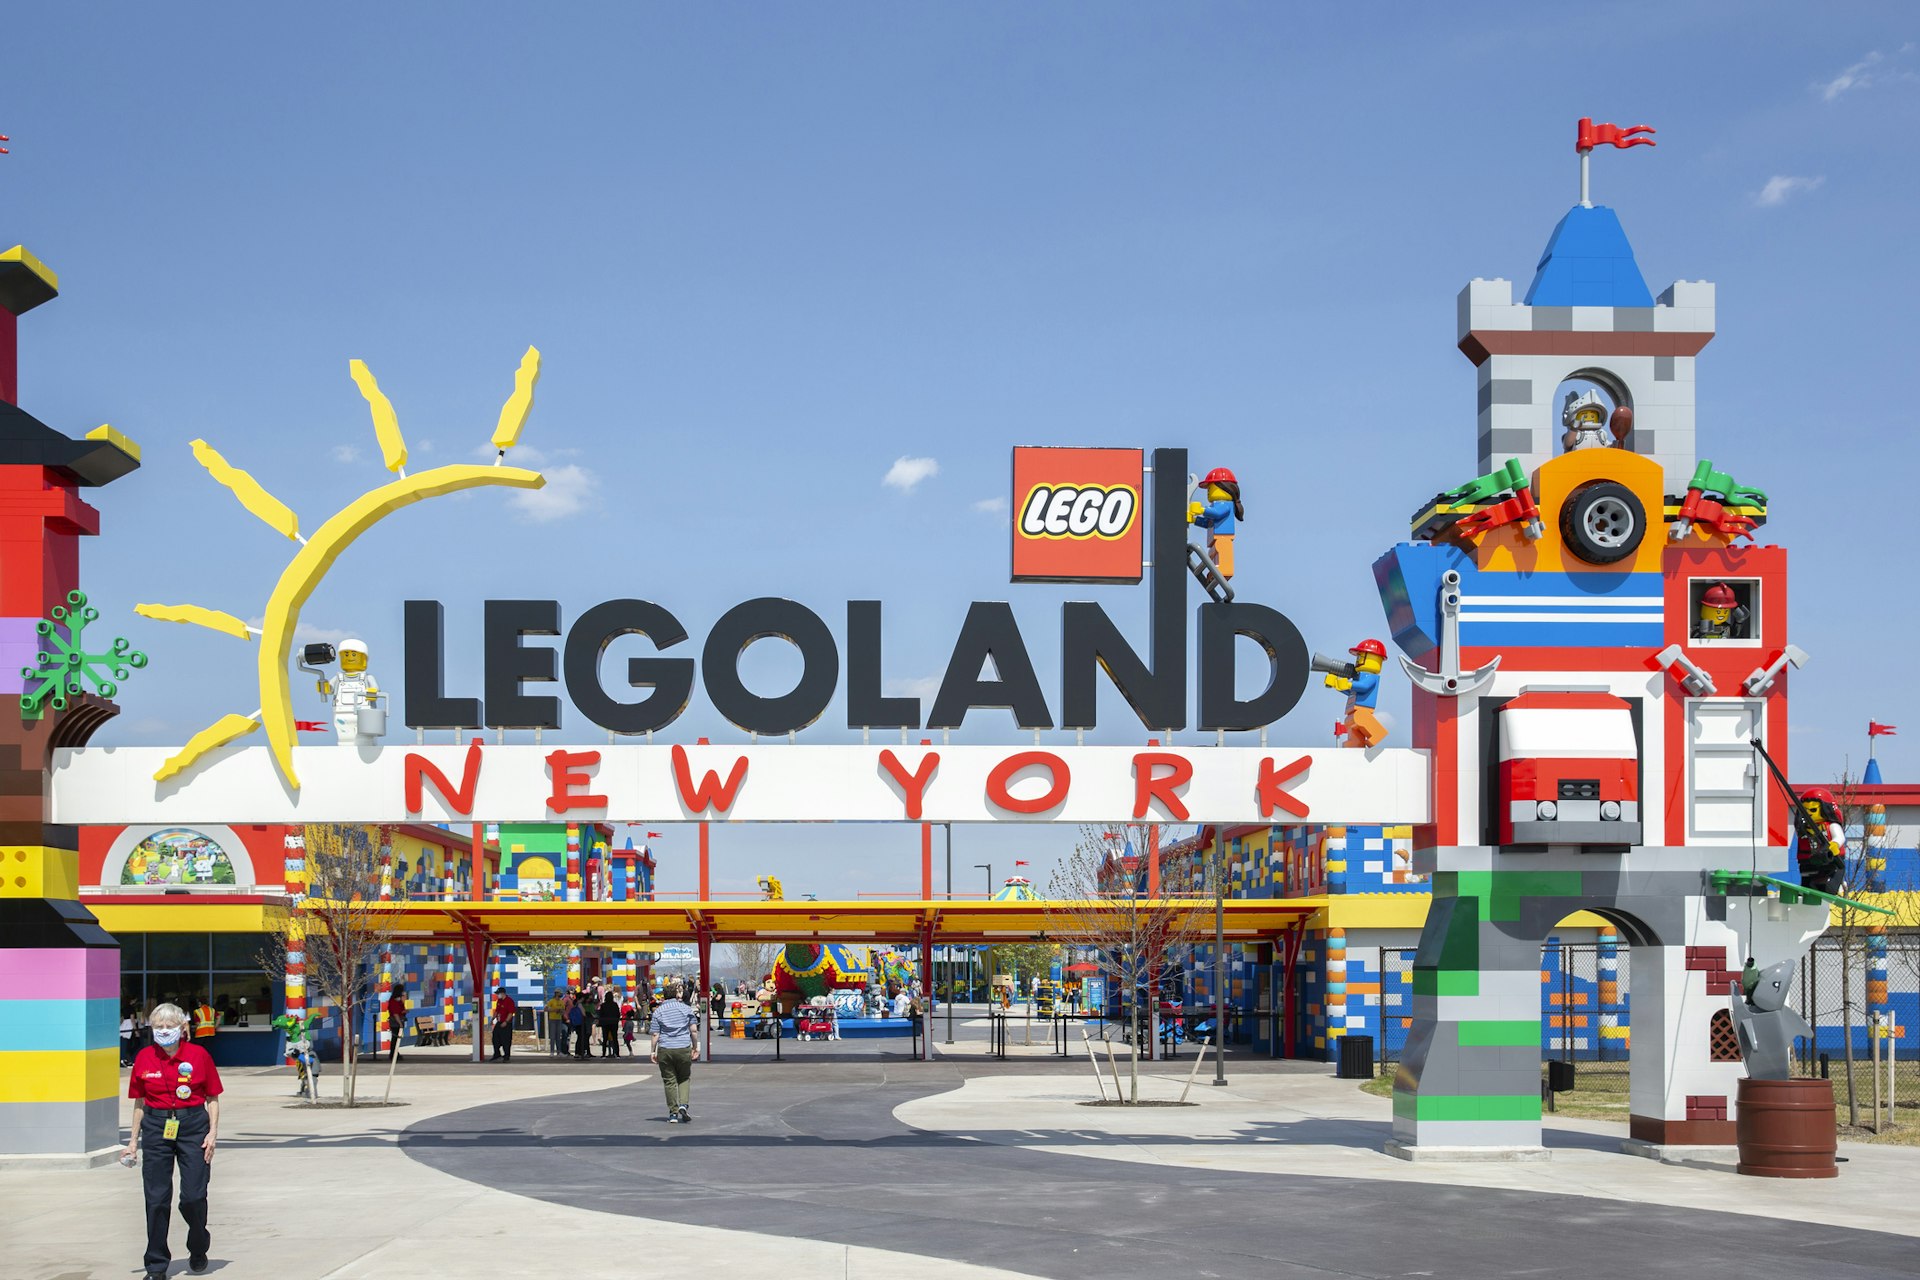 Visitors pass through the colorful entrance gate to Legoland in New York